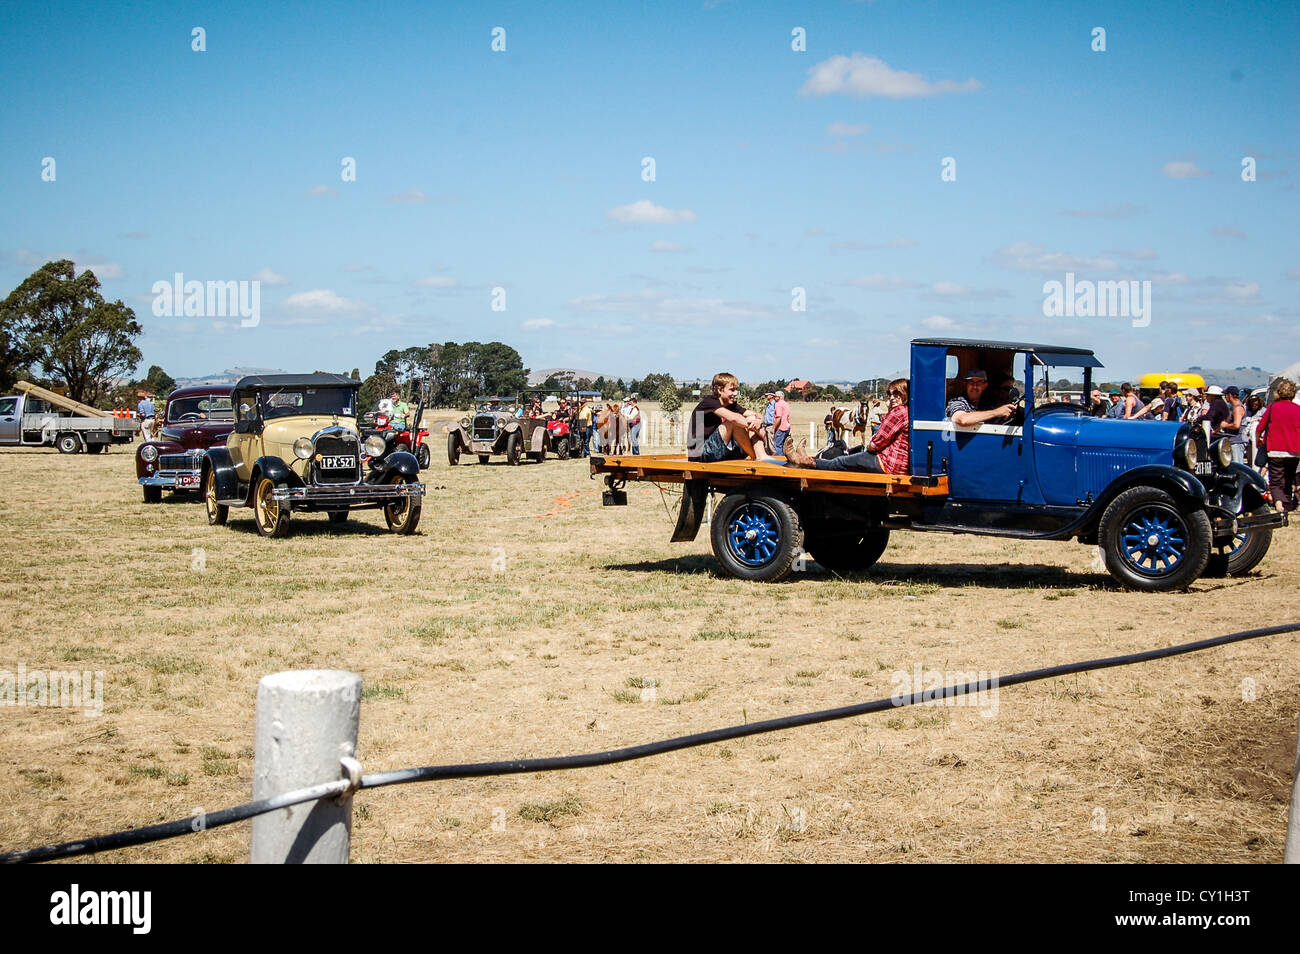 Vintage vehicle parade at annual Clunes Show in small rural town of Clunes, Australia. Stock Photo